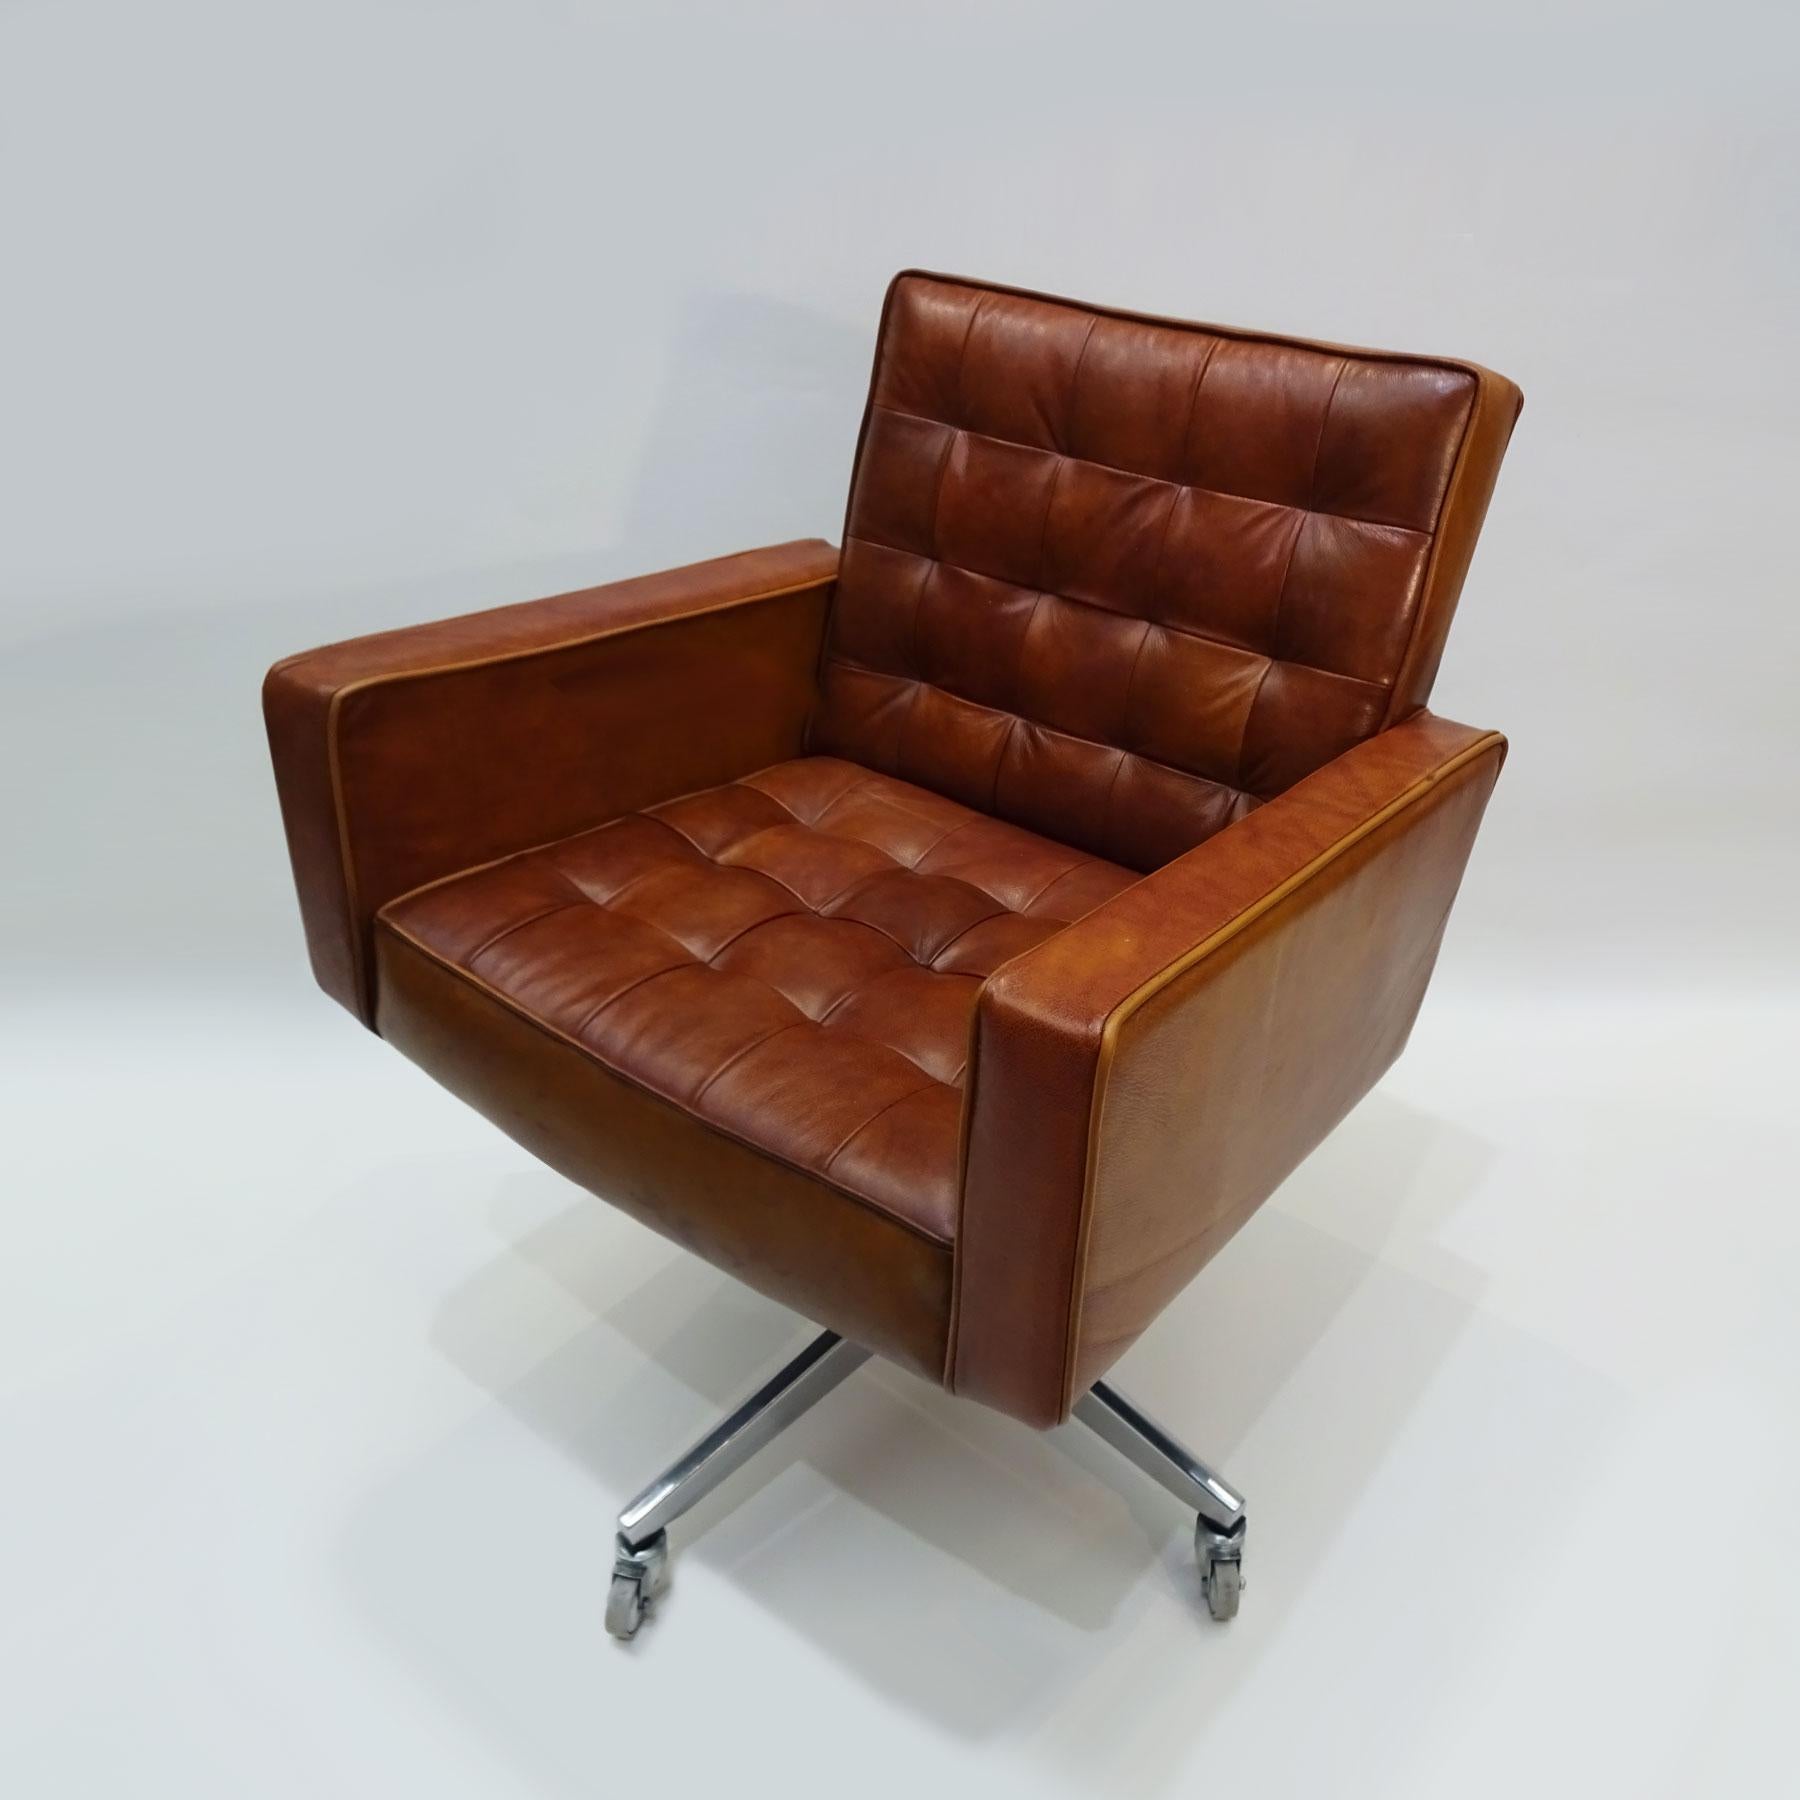 A truly exceptional example of this Classic late 1950s leather office task chair designed by Vincent Cafiero for Knoll.

Featuring the original thick cognac paneled leather this chair stands out as one of the finest examples of Cafiero's work.